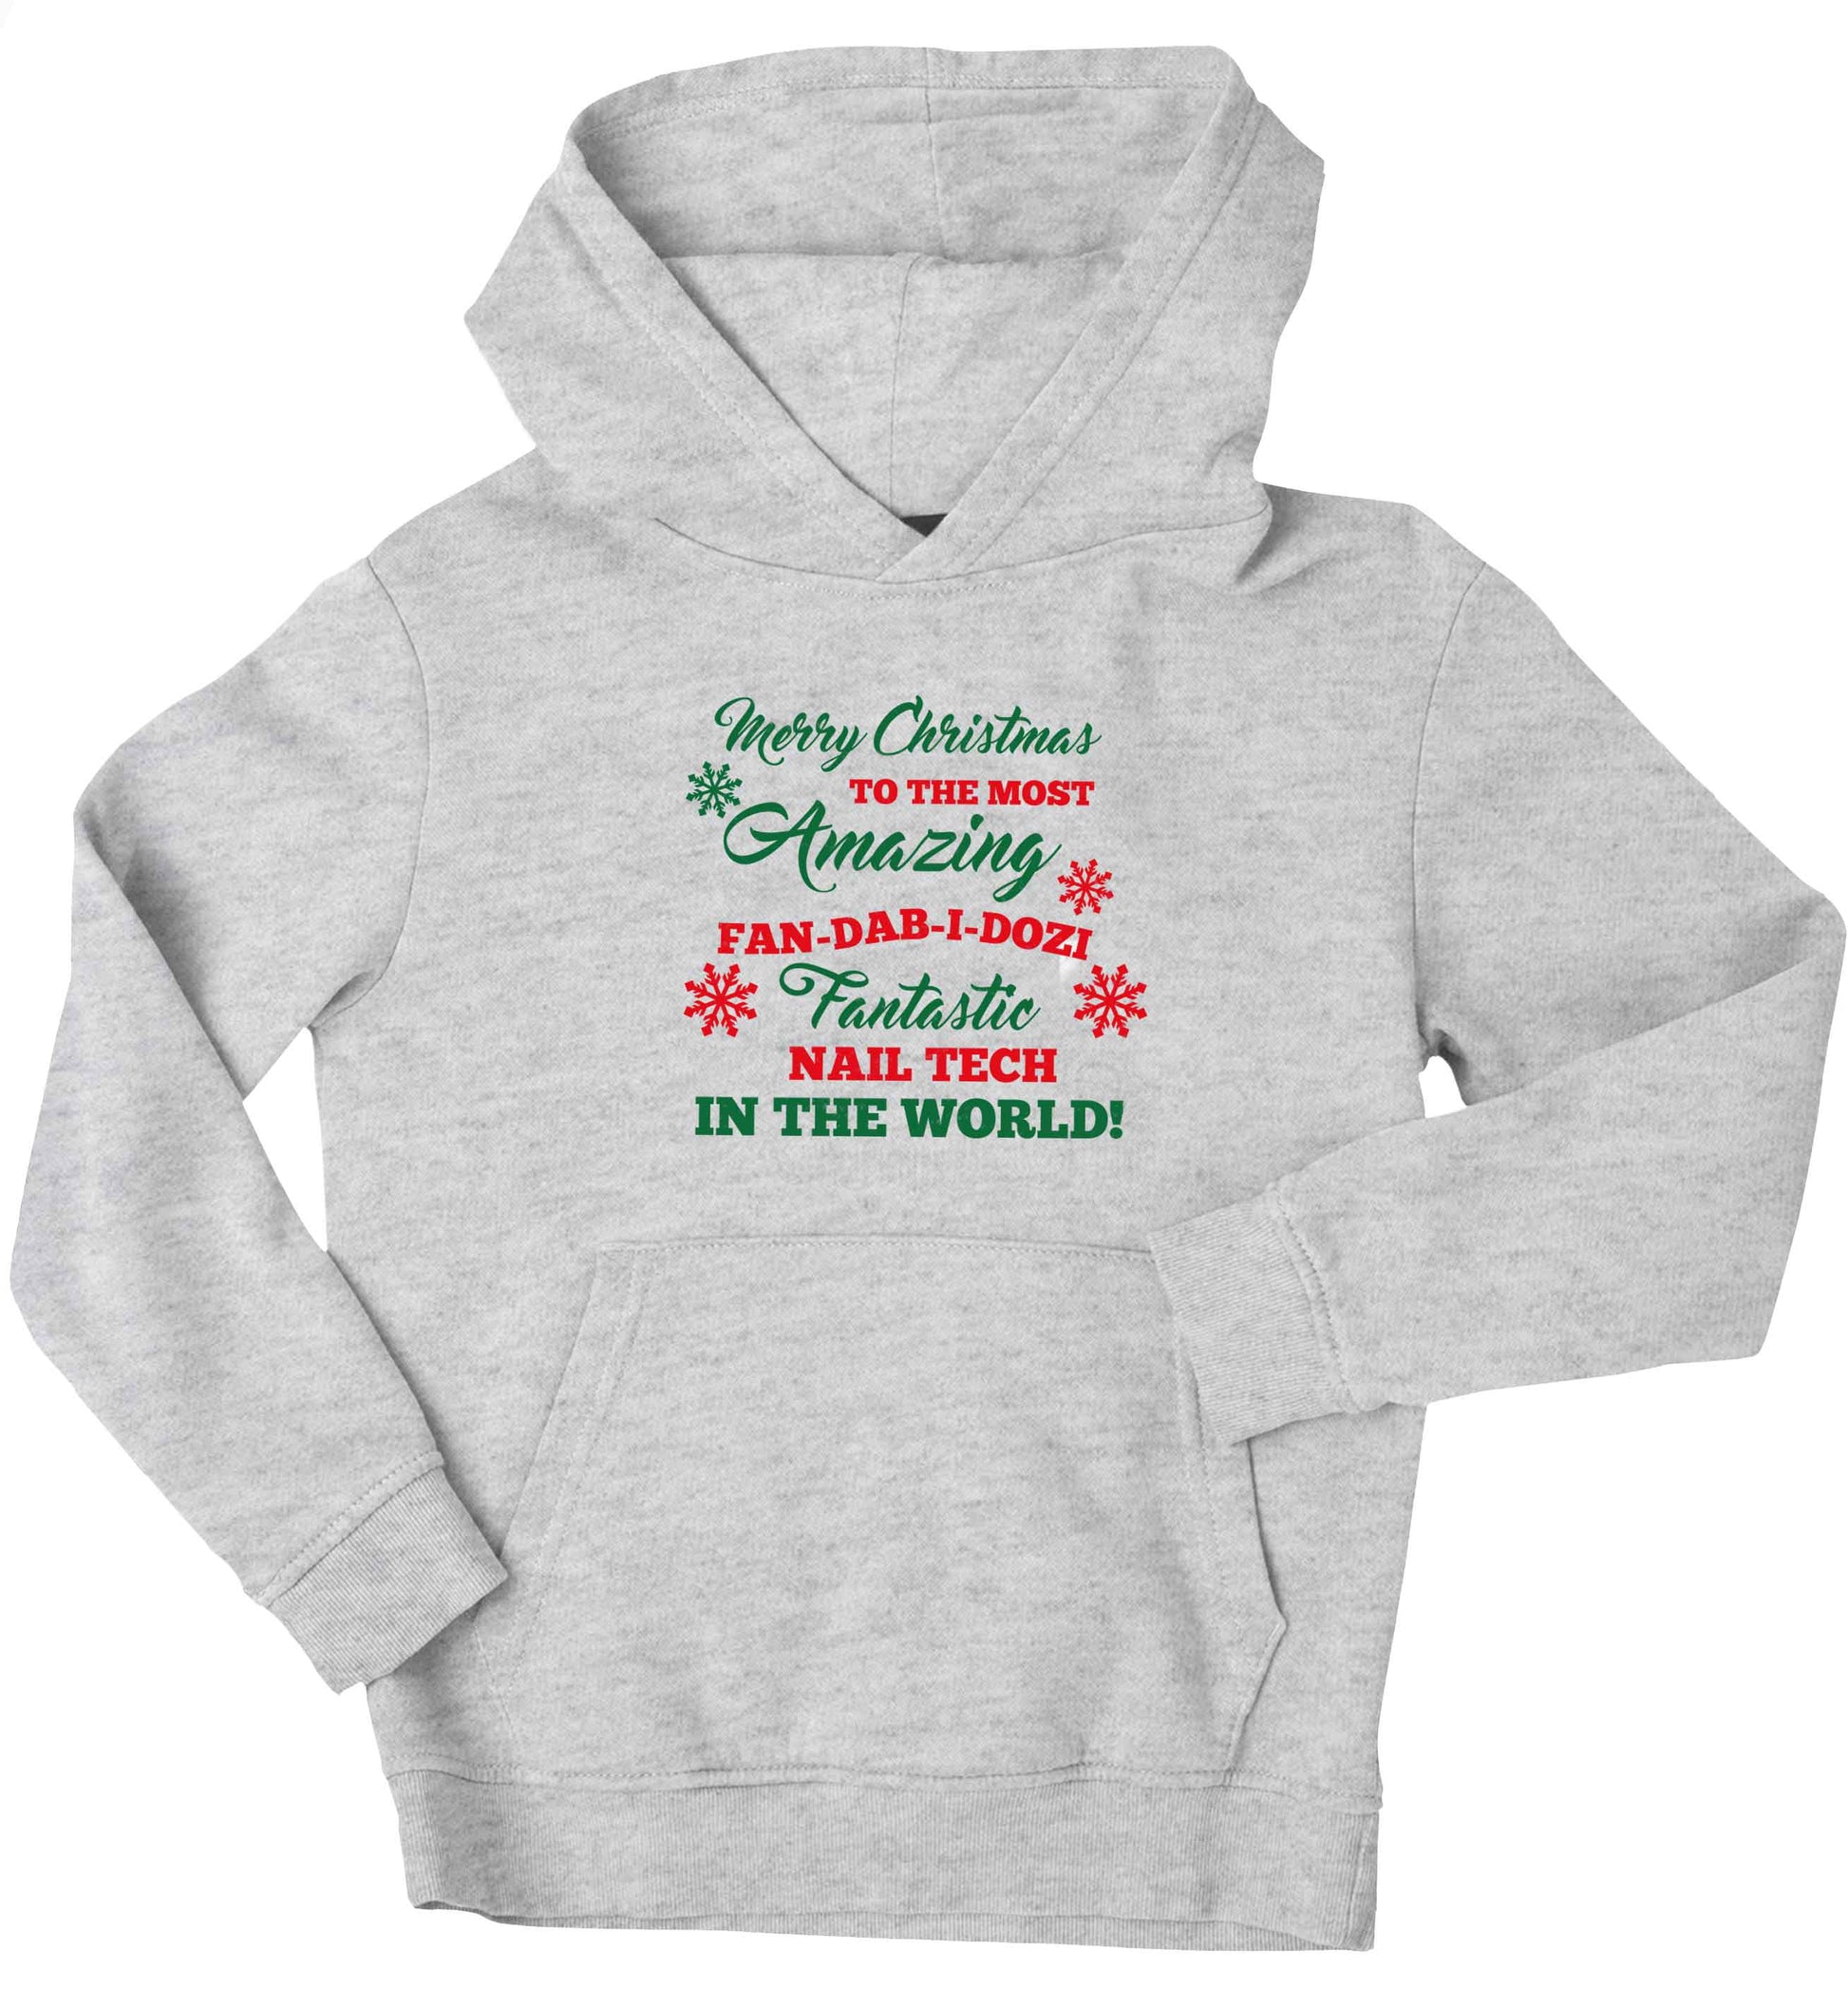 Merry Christmas to the most amazing fan-dab-i-dozi fantasic nail technician in the world children's grey hoodie 12-13 Years